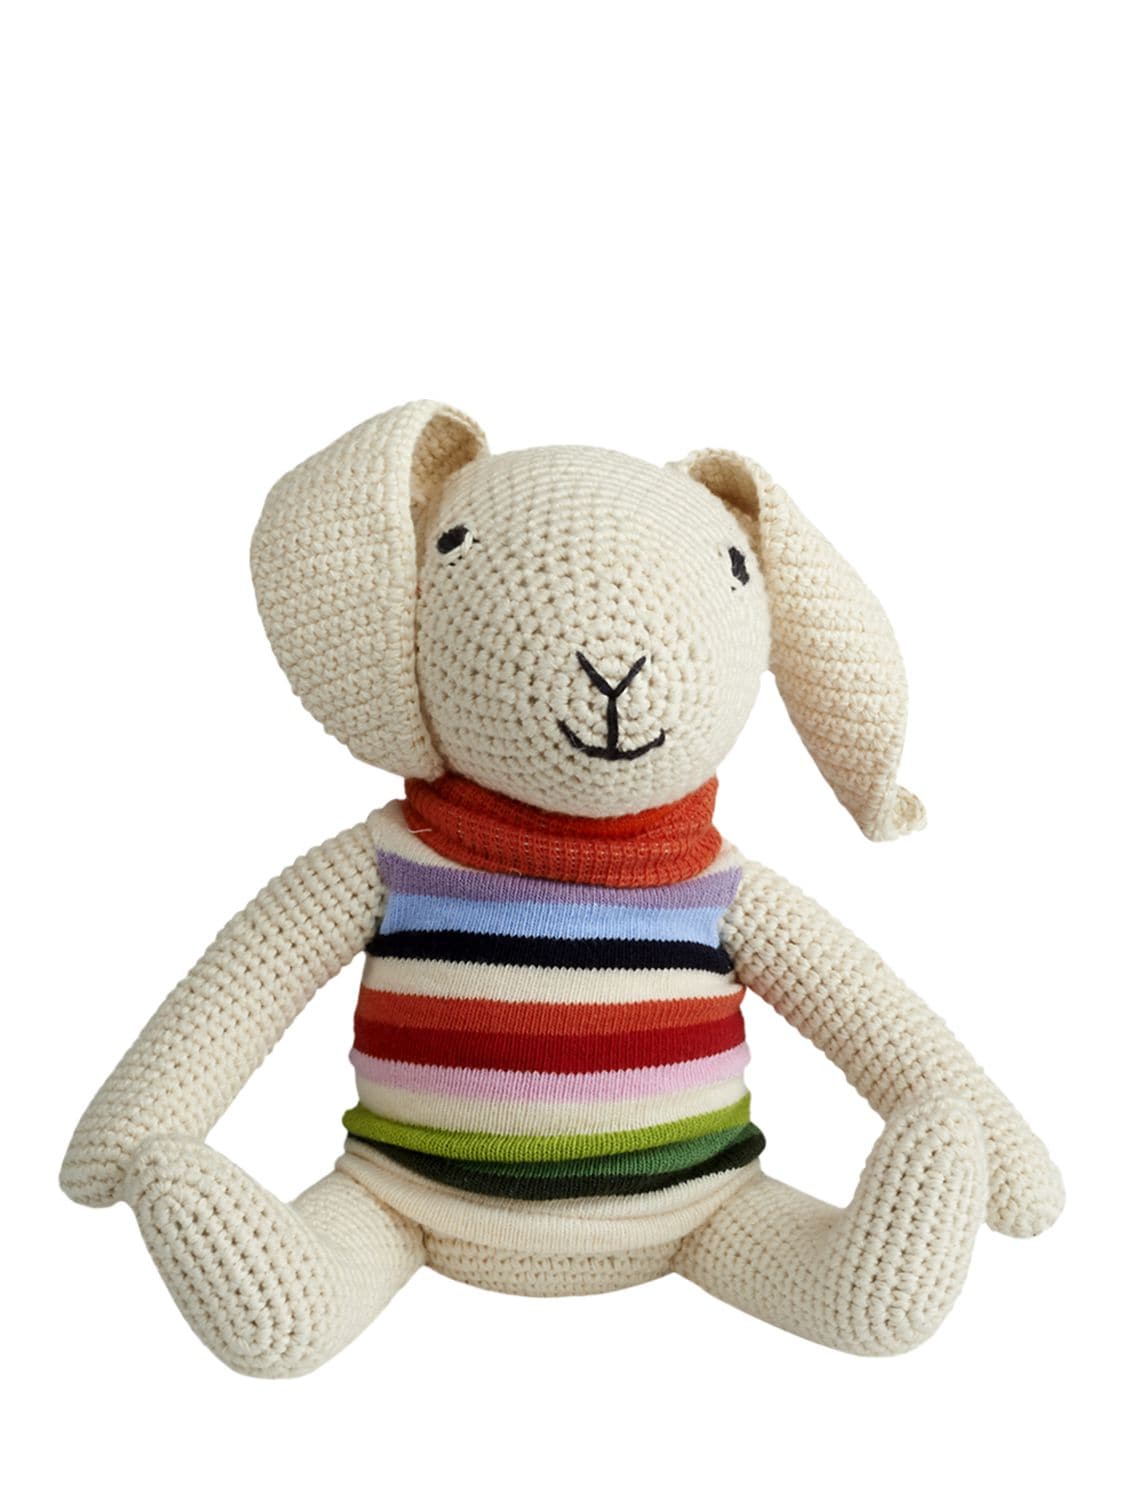 Anne-claire Petit Kids' Hand-crocheted Organic Cotton Rabbit In White